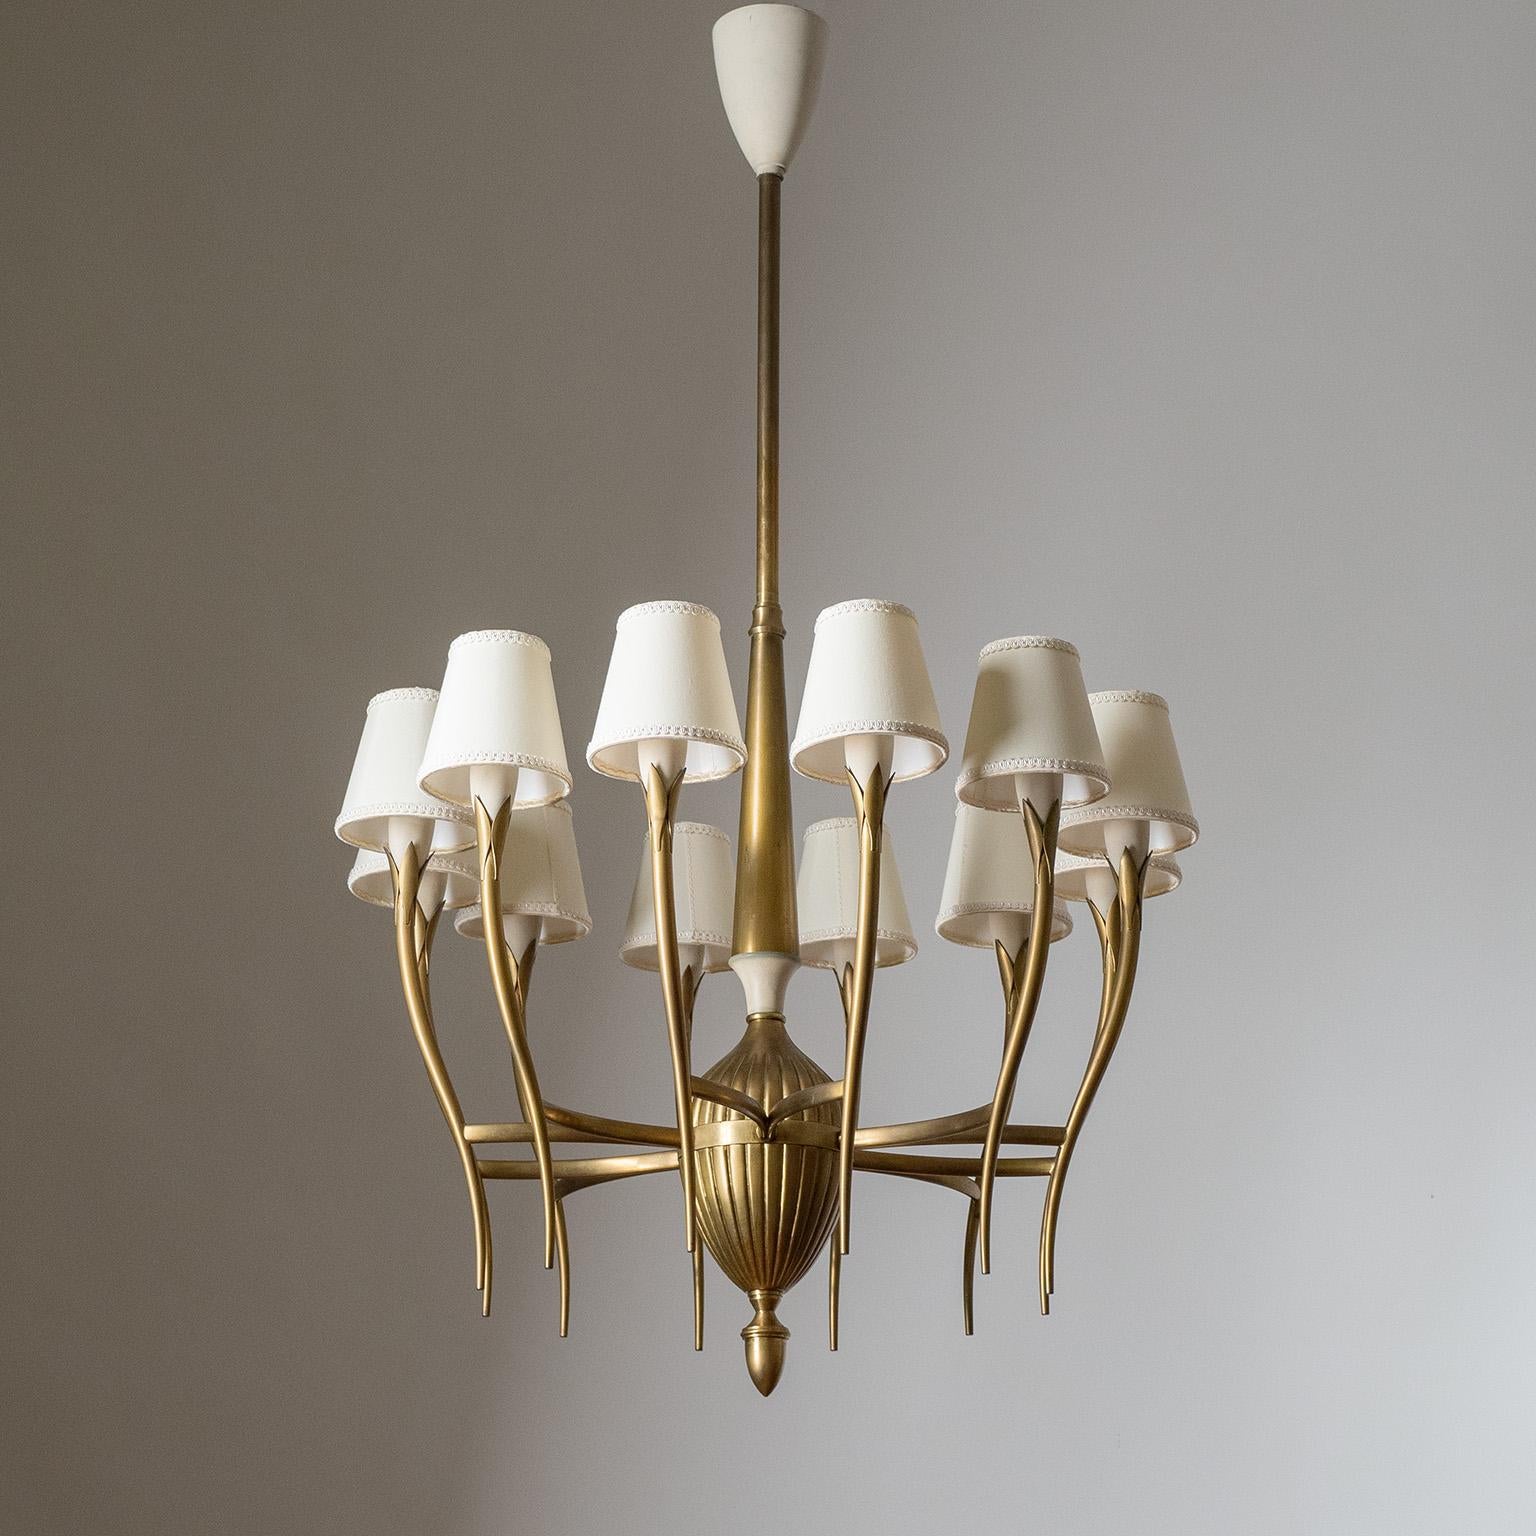 Rare Italian brass chandelier from the 1940-1950s. Twelve slender and sensuously curved brass arms with a satin finish and off-white lacquered socket covers. Original brass E14 sockets with new wiring and custom shades.

Measures: Height 102cm